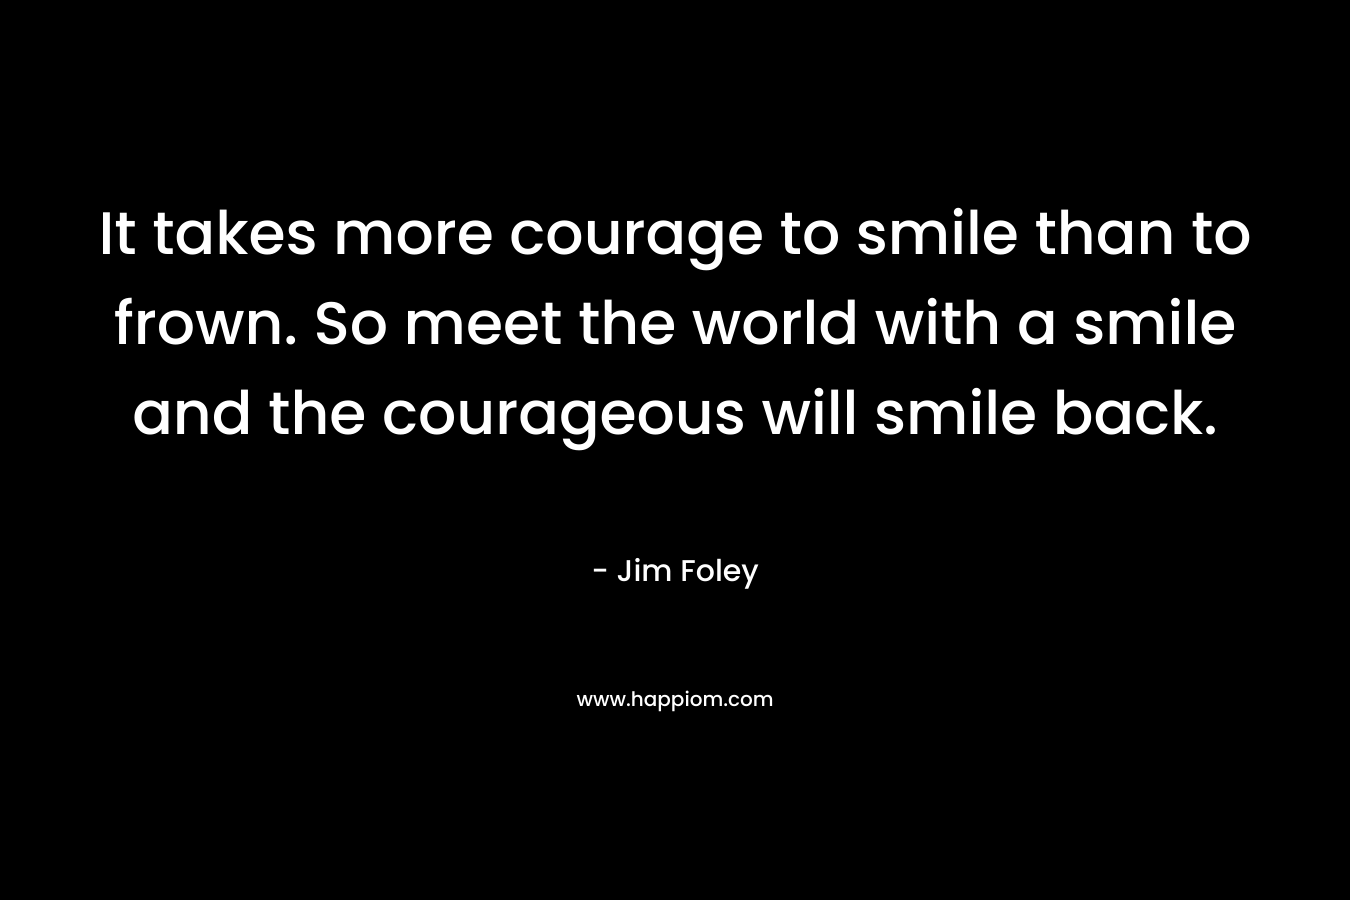 It takes more courage to smile than to frown. So meet the world with a smile and the courageous will smile back. – Jim Foley